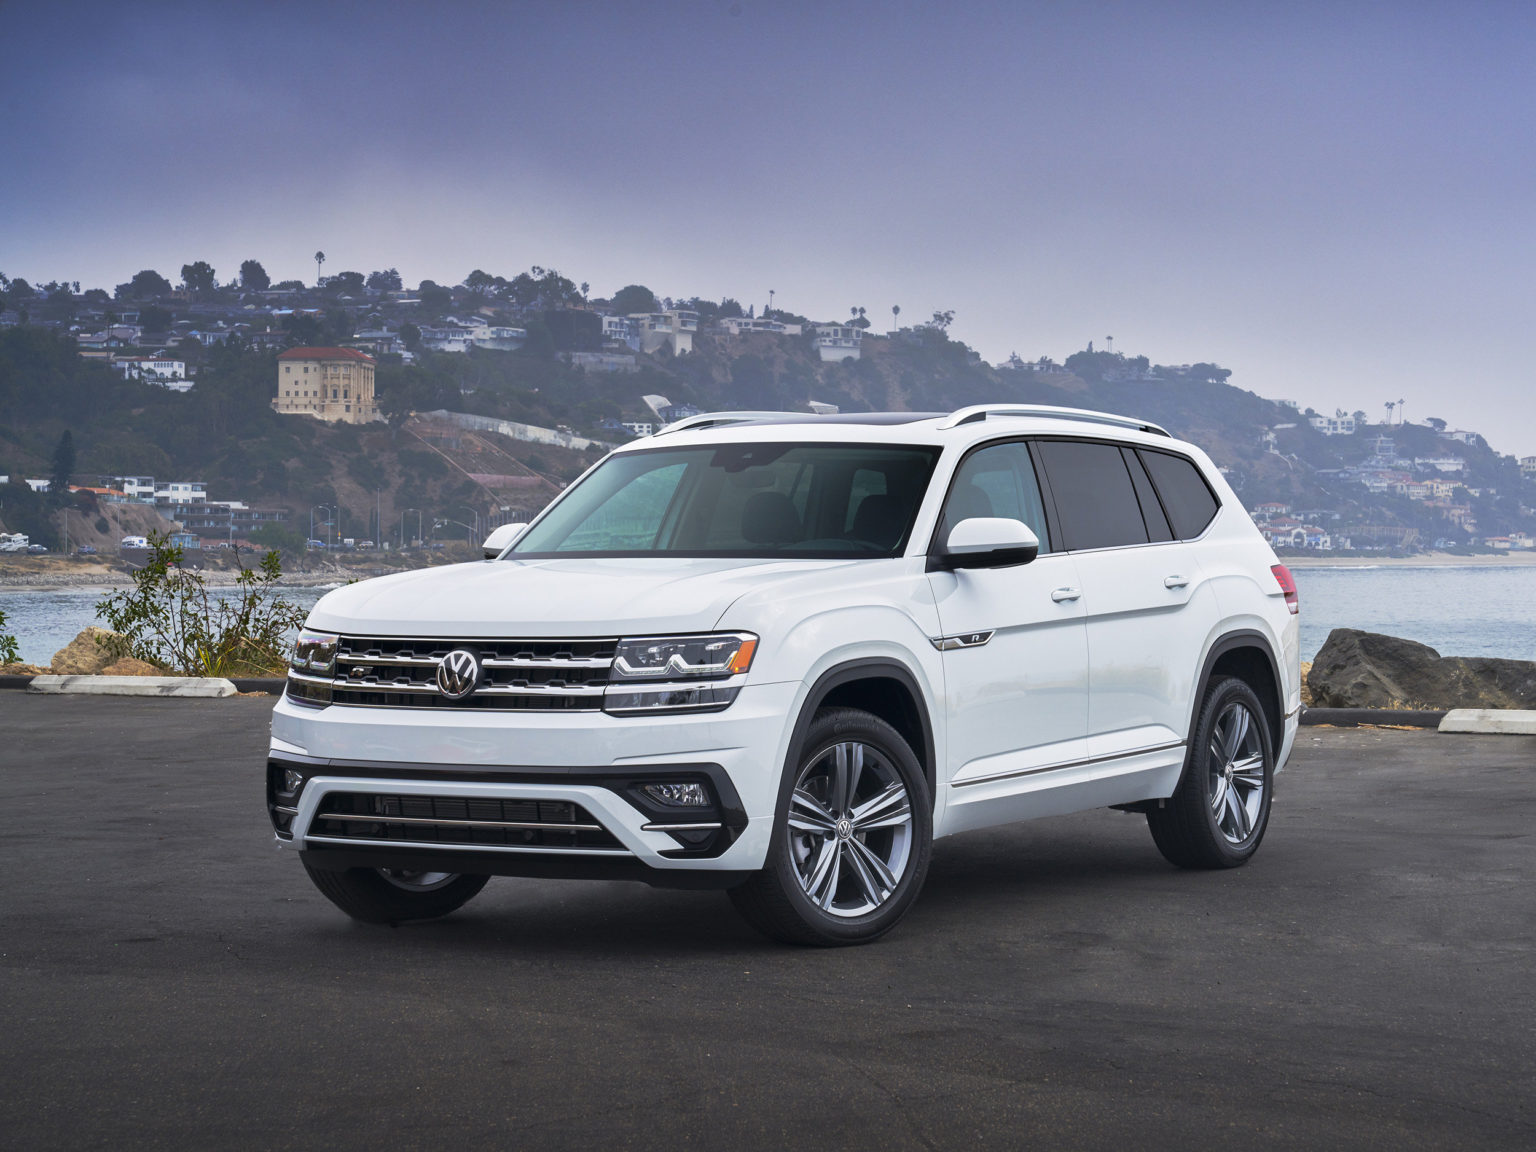 Volkswagen's recent survey found that SUV owners are using their third row much more than originally thought.